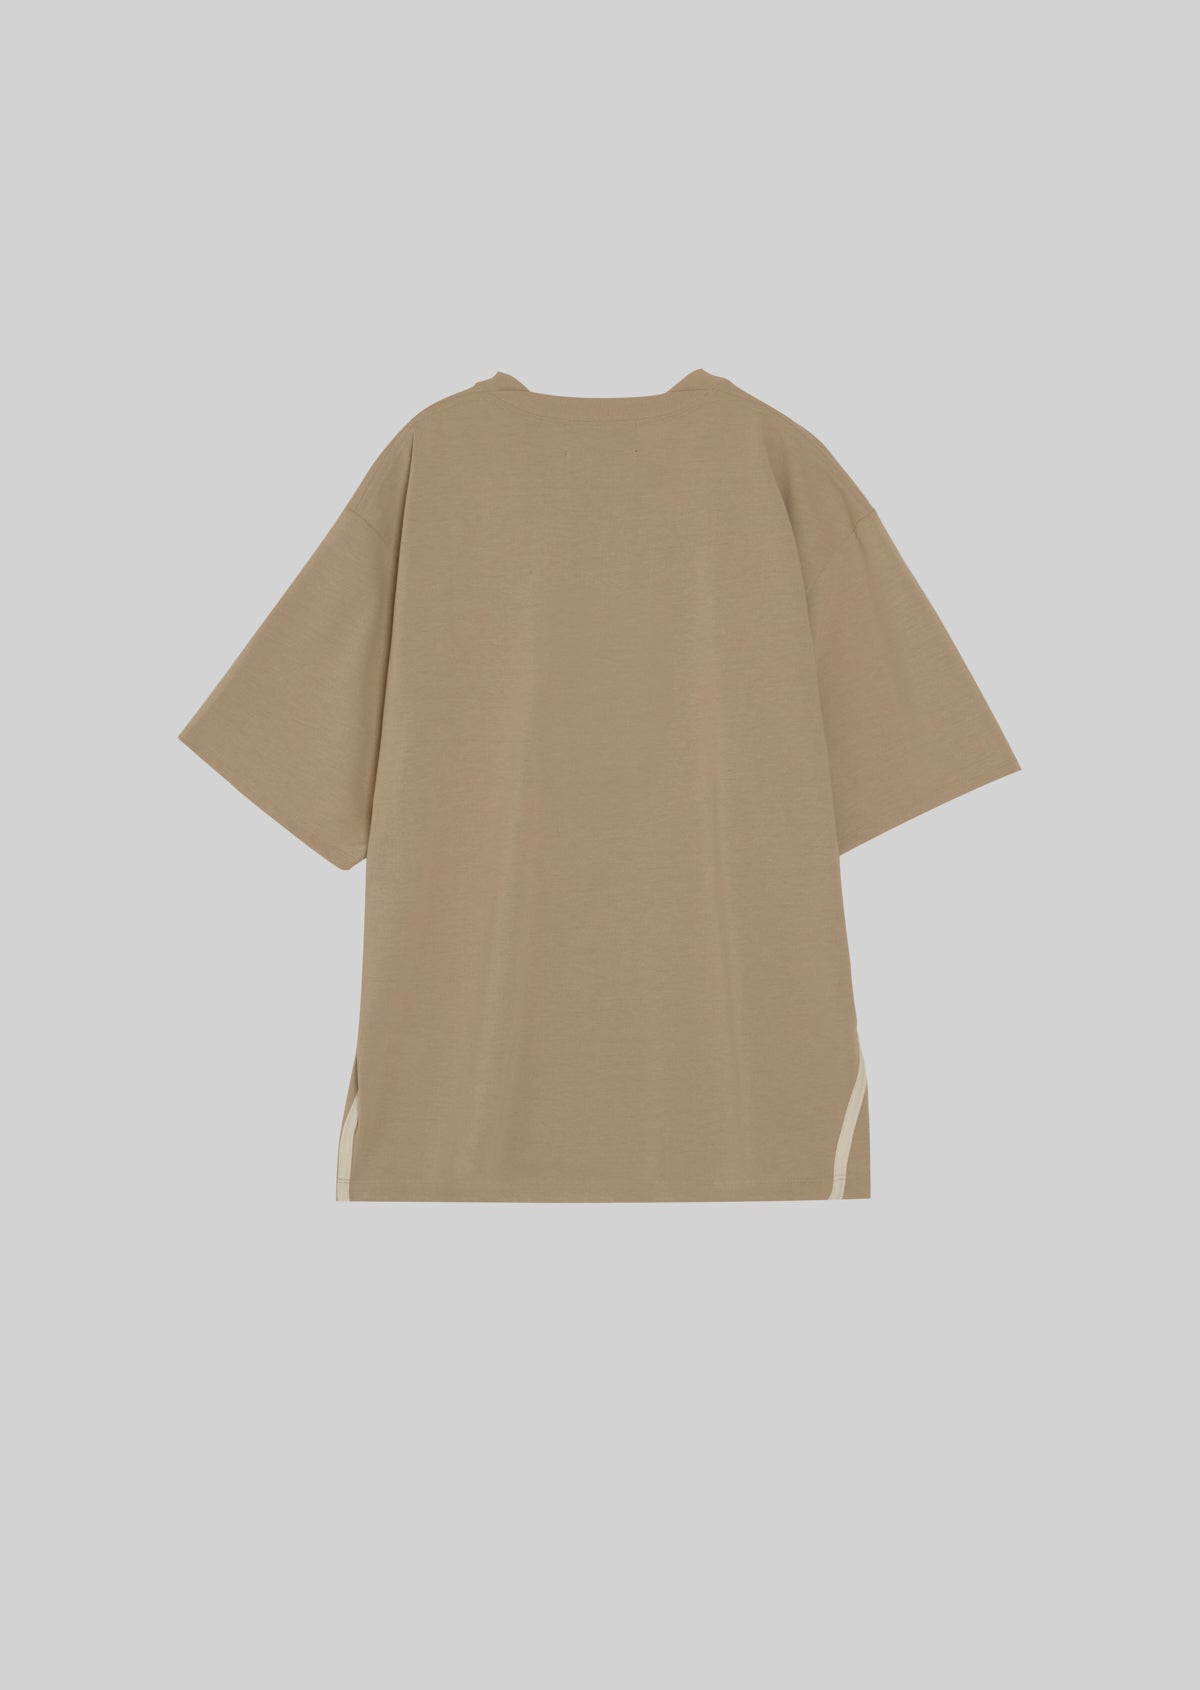 POLYESTER COTTON FEEL T-SHIRT BEIGE 8001-1702